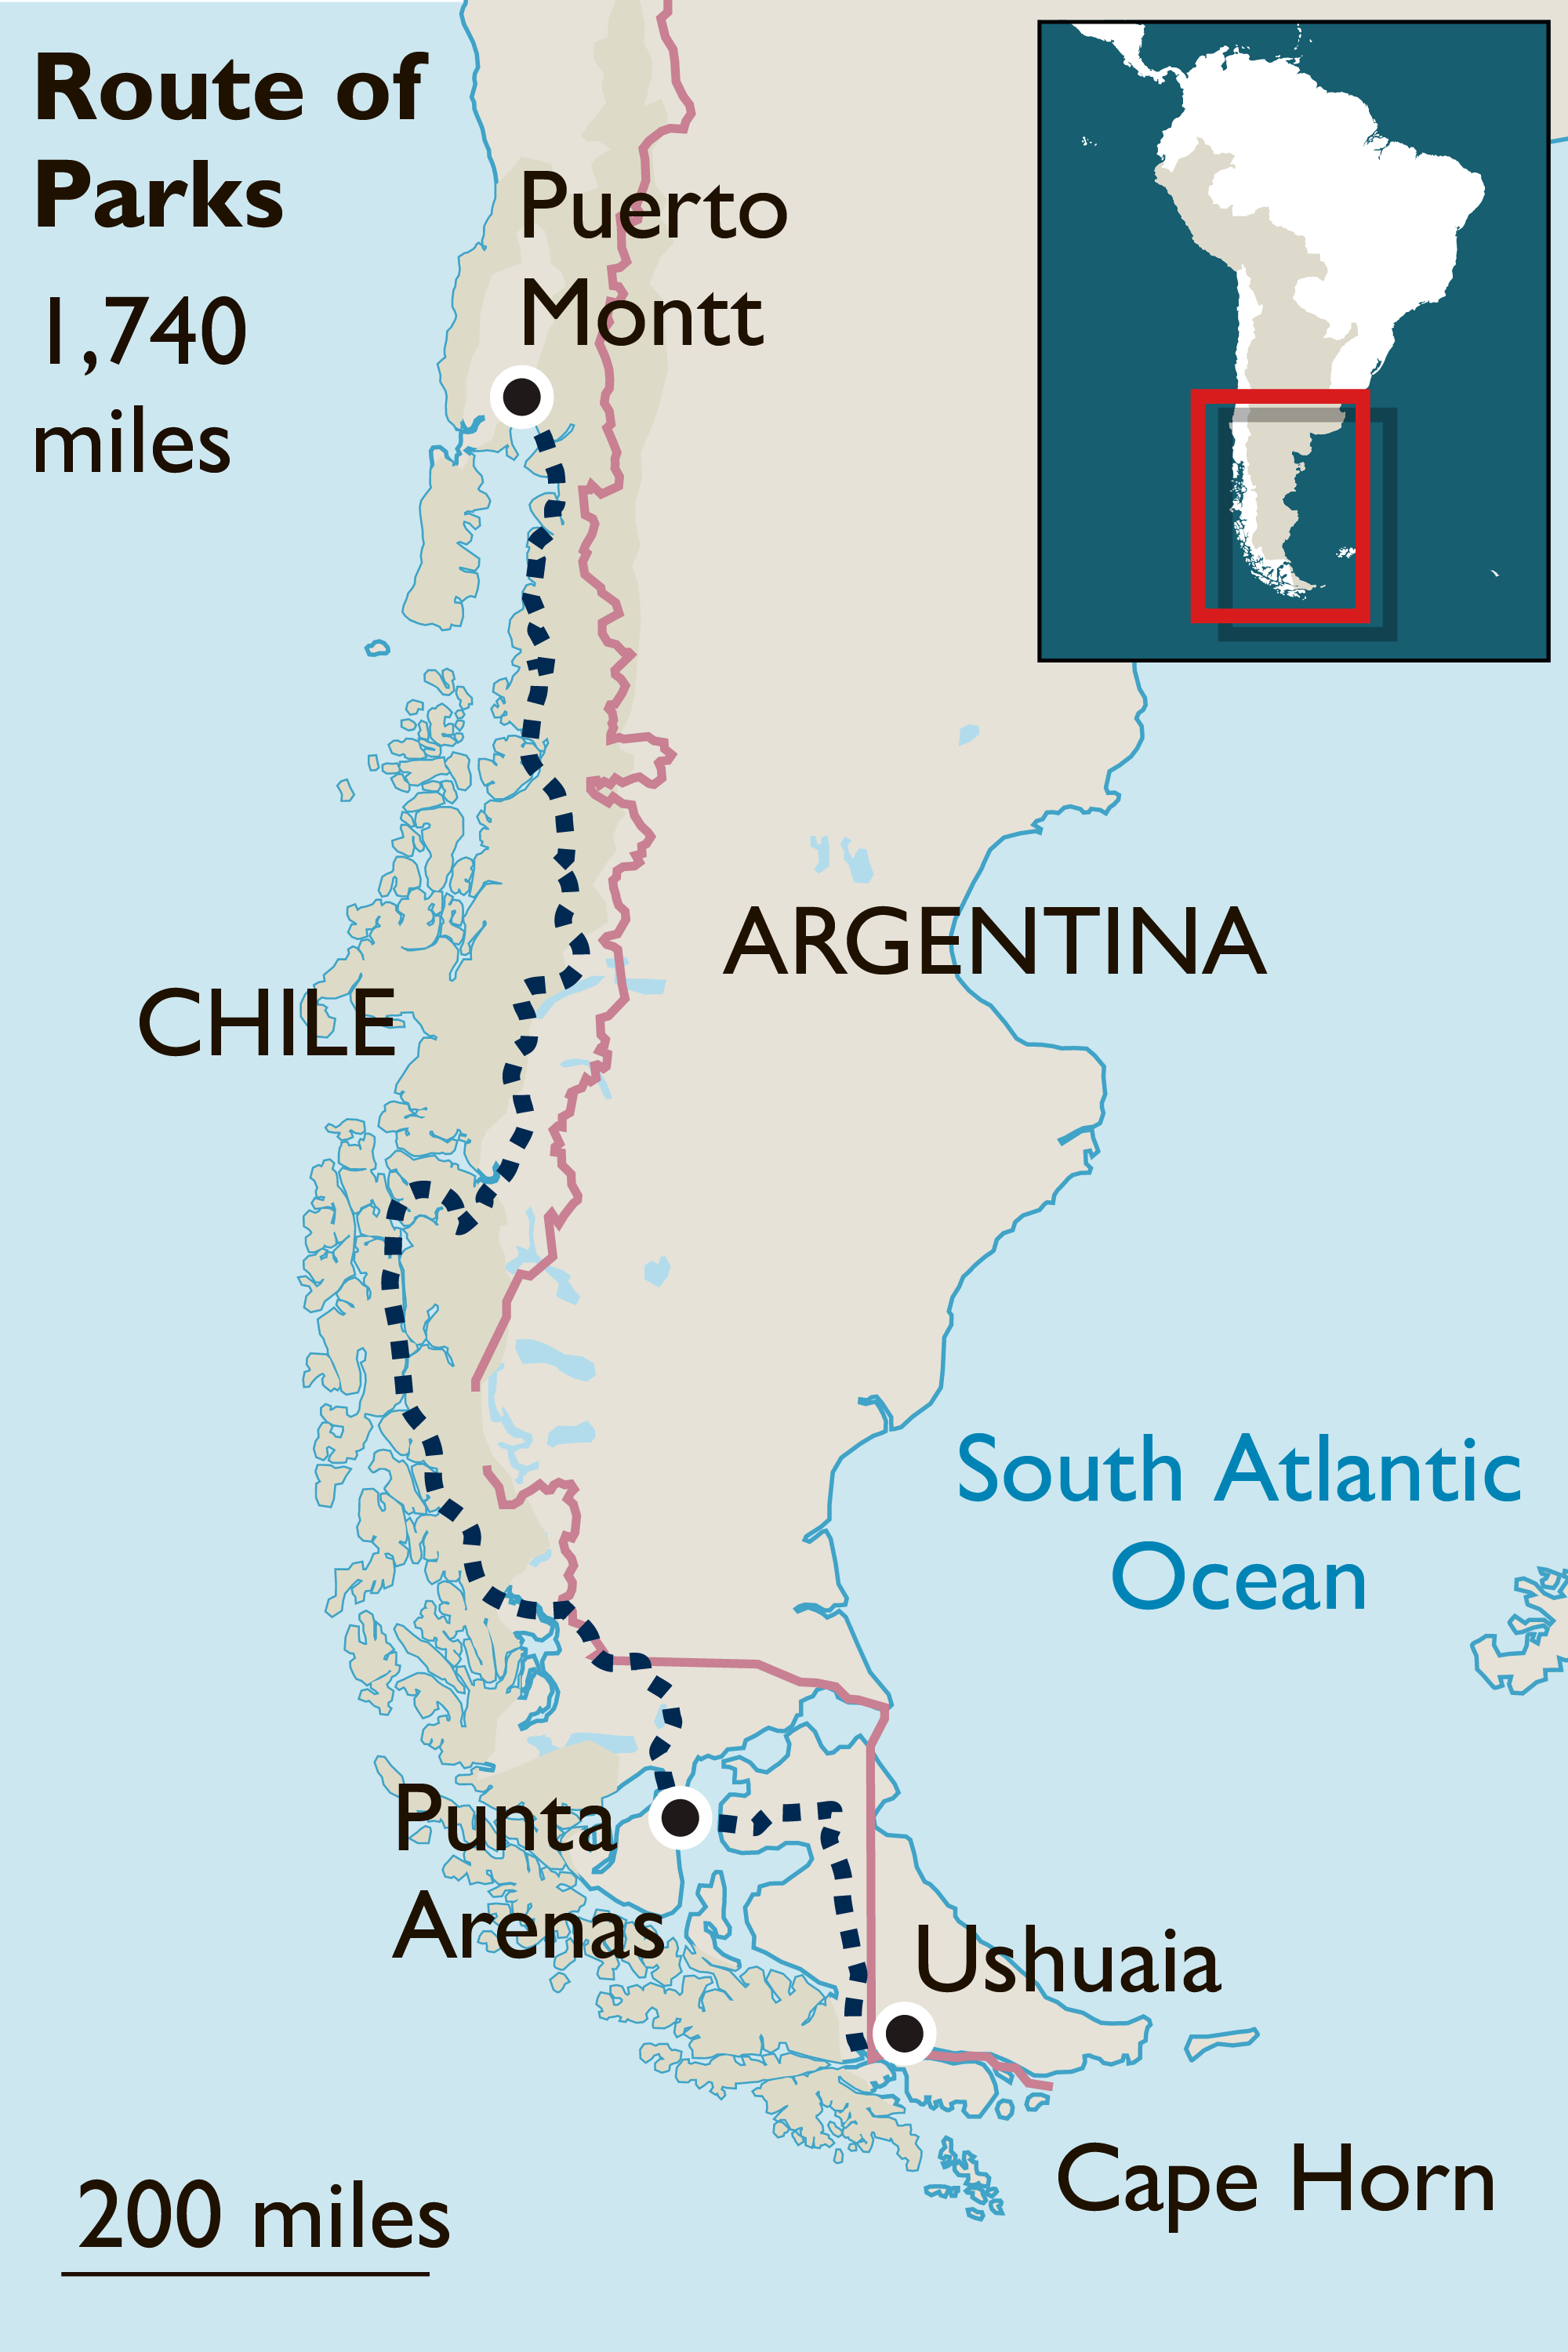 History Of Chile Route Of Parks Trail Patagonia